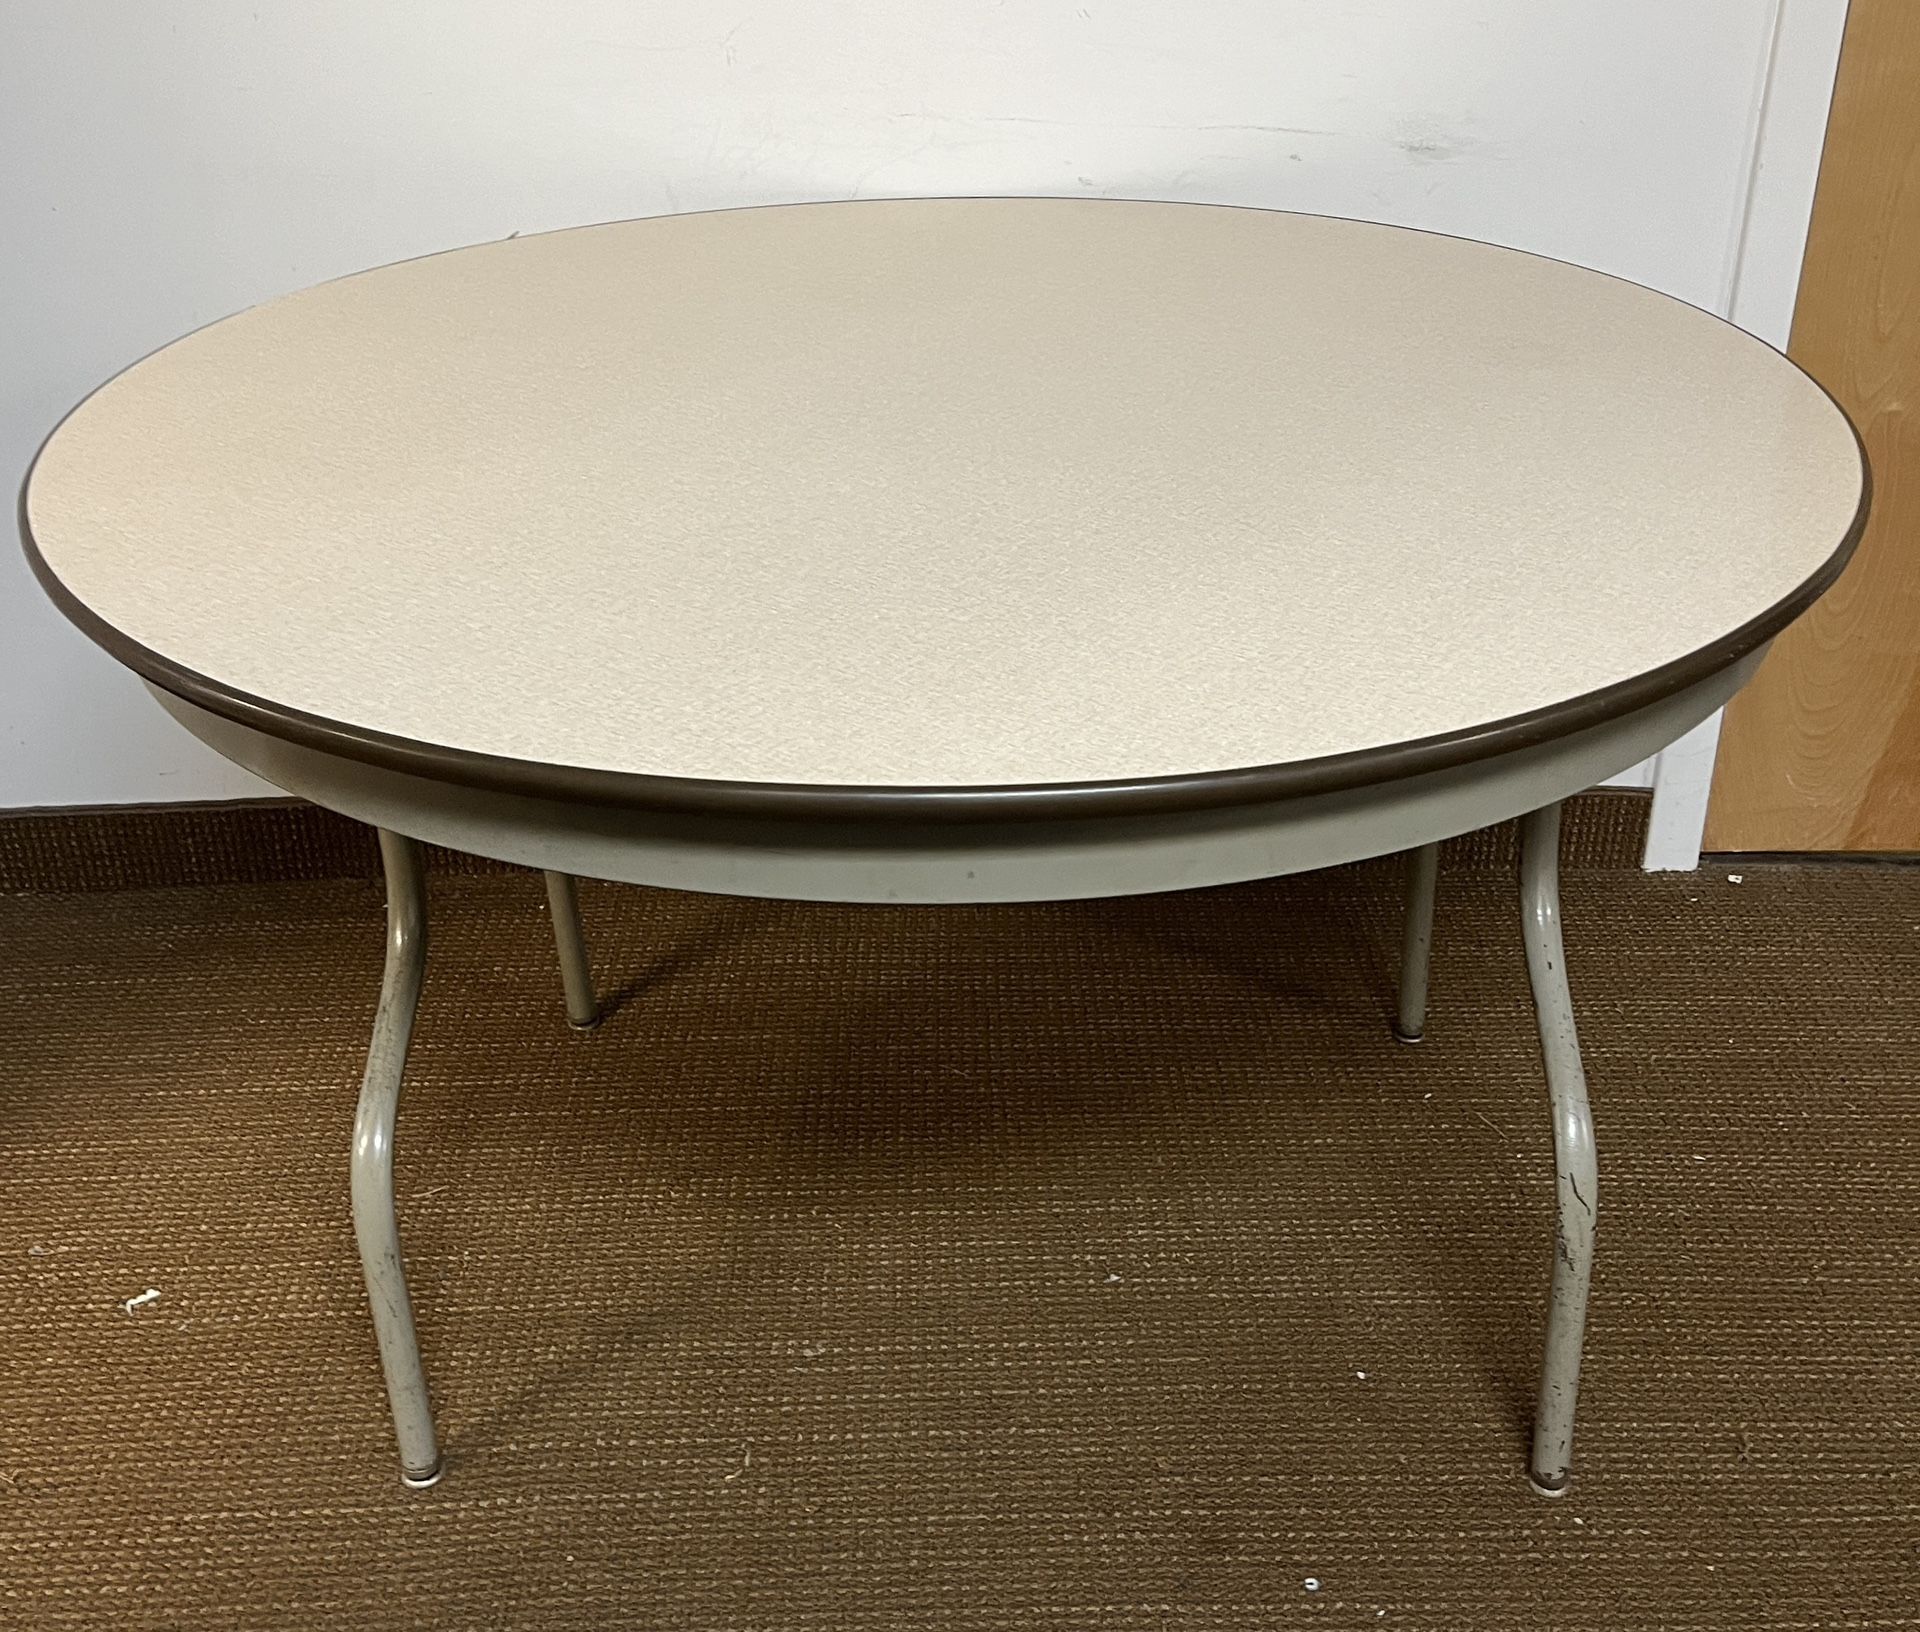 Midwest 48” Round Folding Table. Formica Top with Metal Legs. Beige. Banquet Table